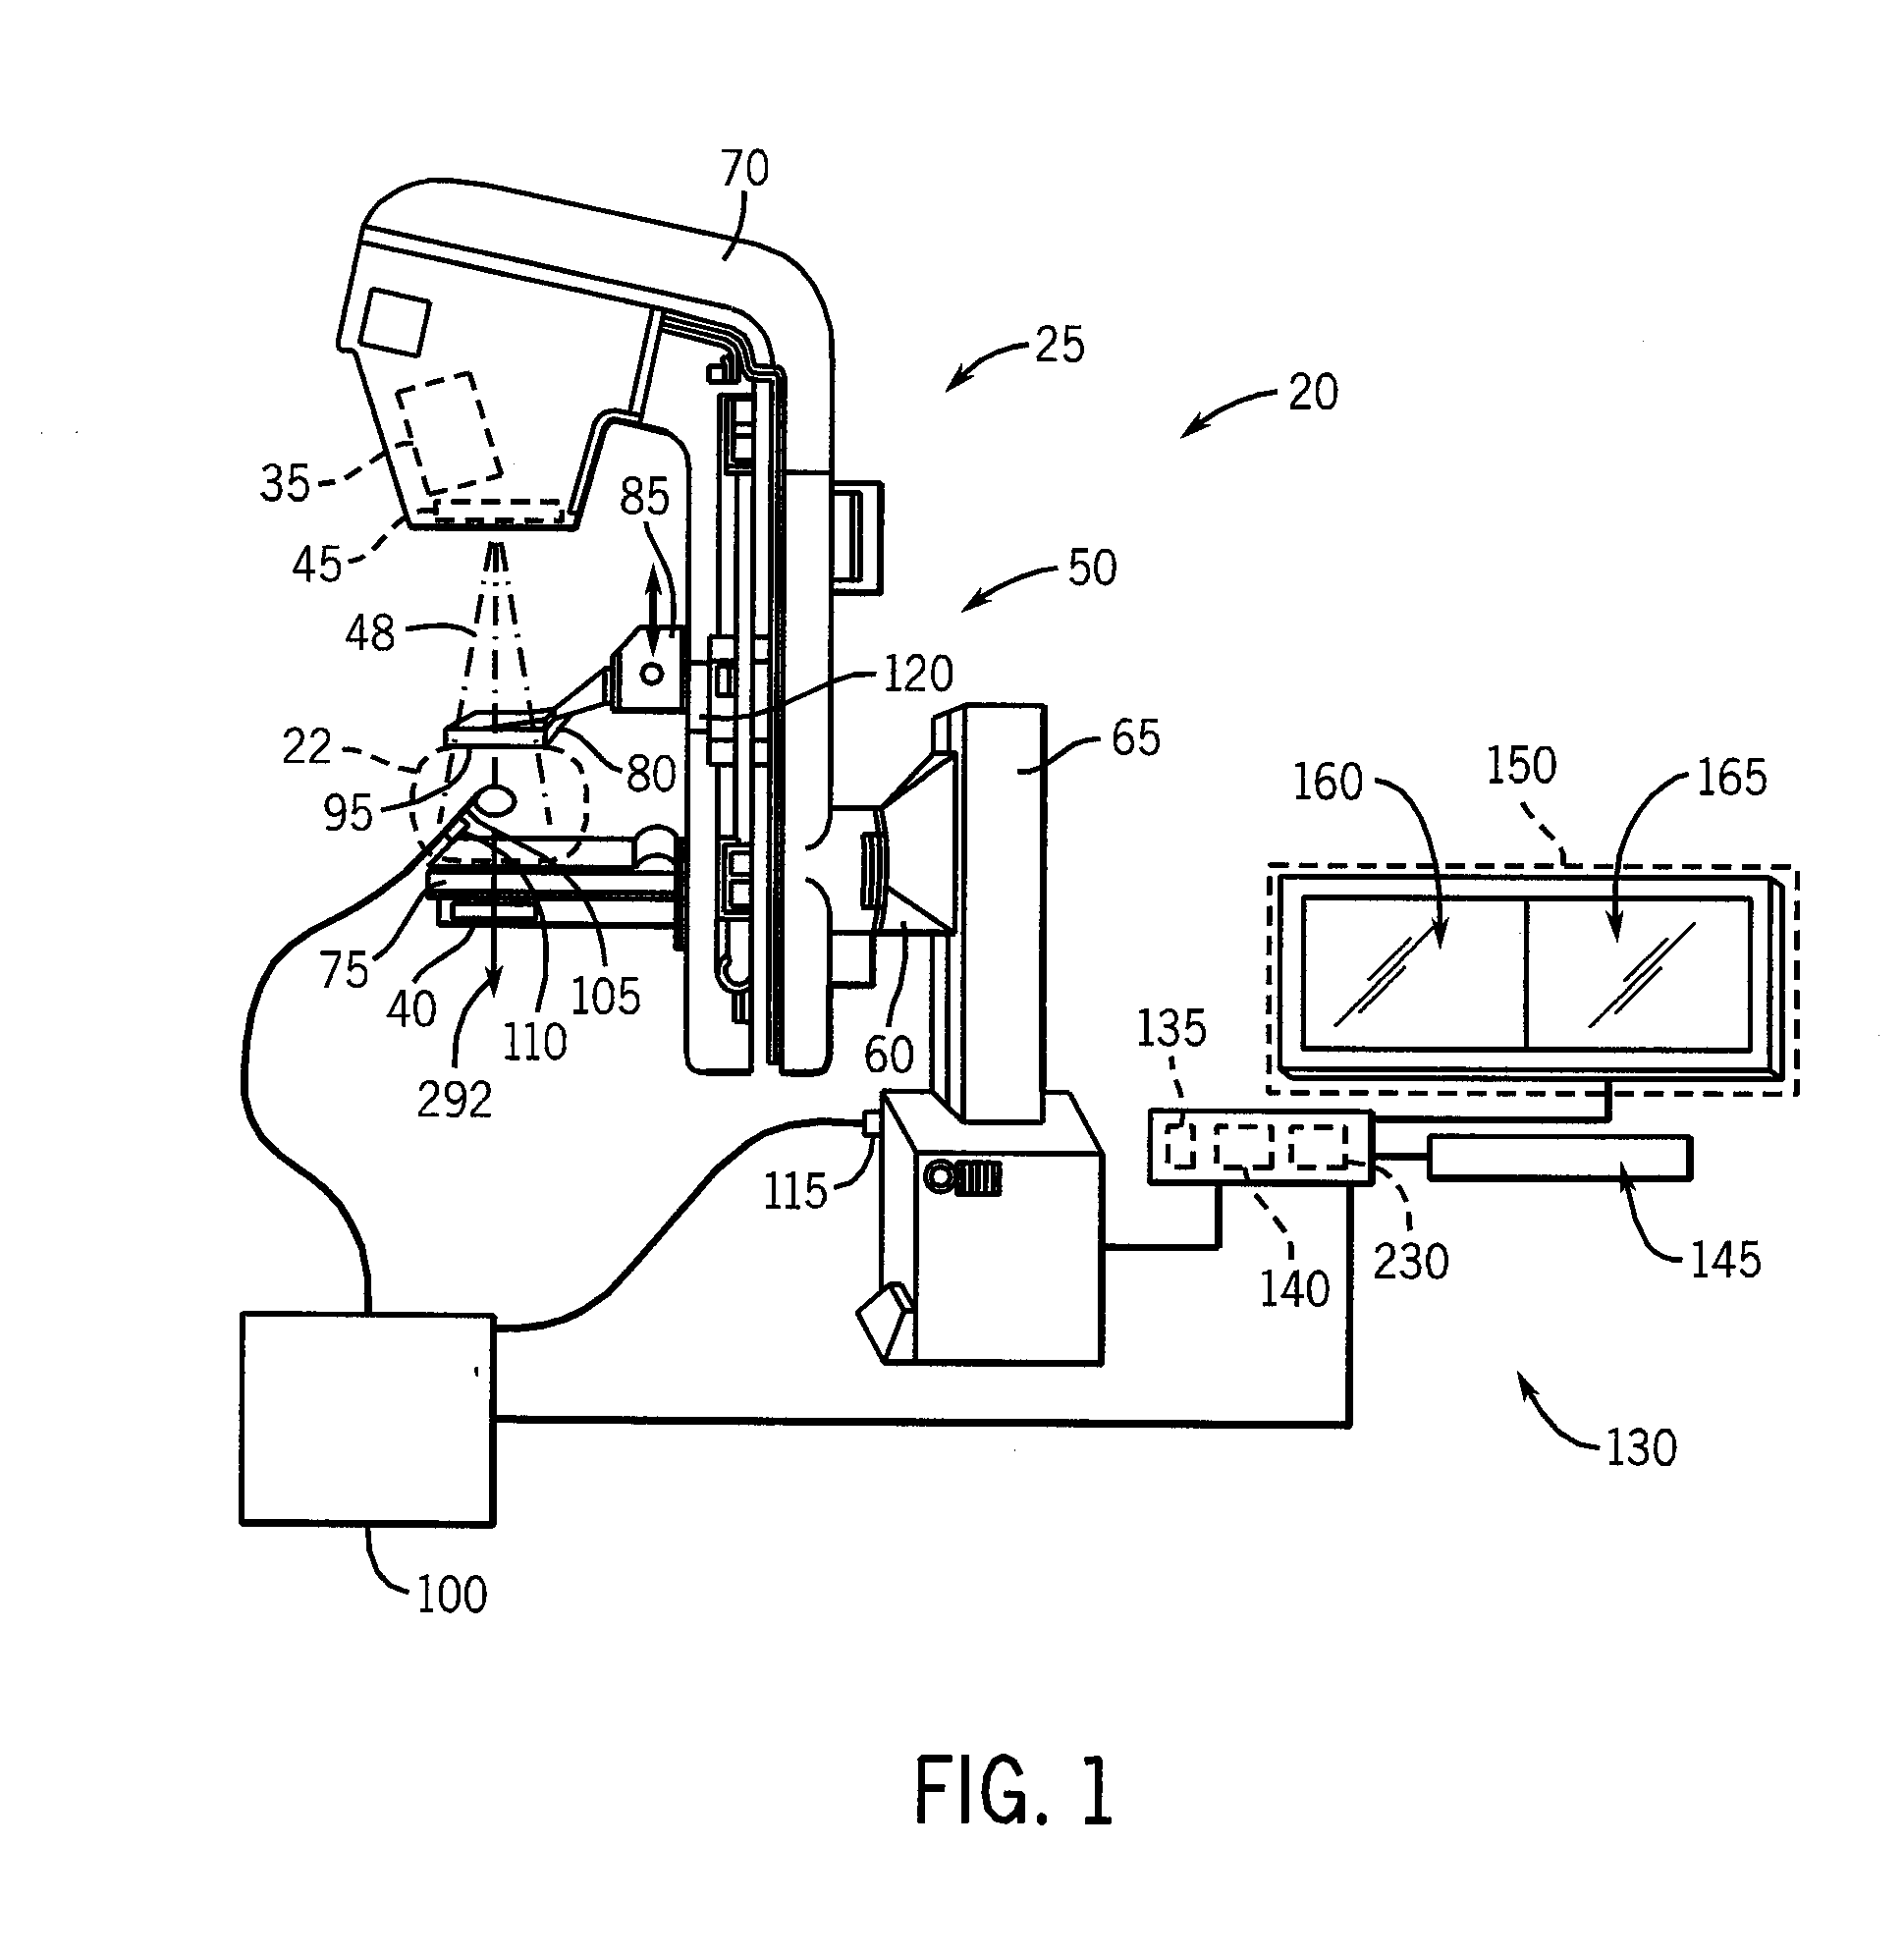 System and method to generate a selected visualization of a radiological image of an imaged subject